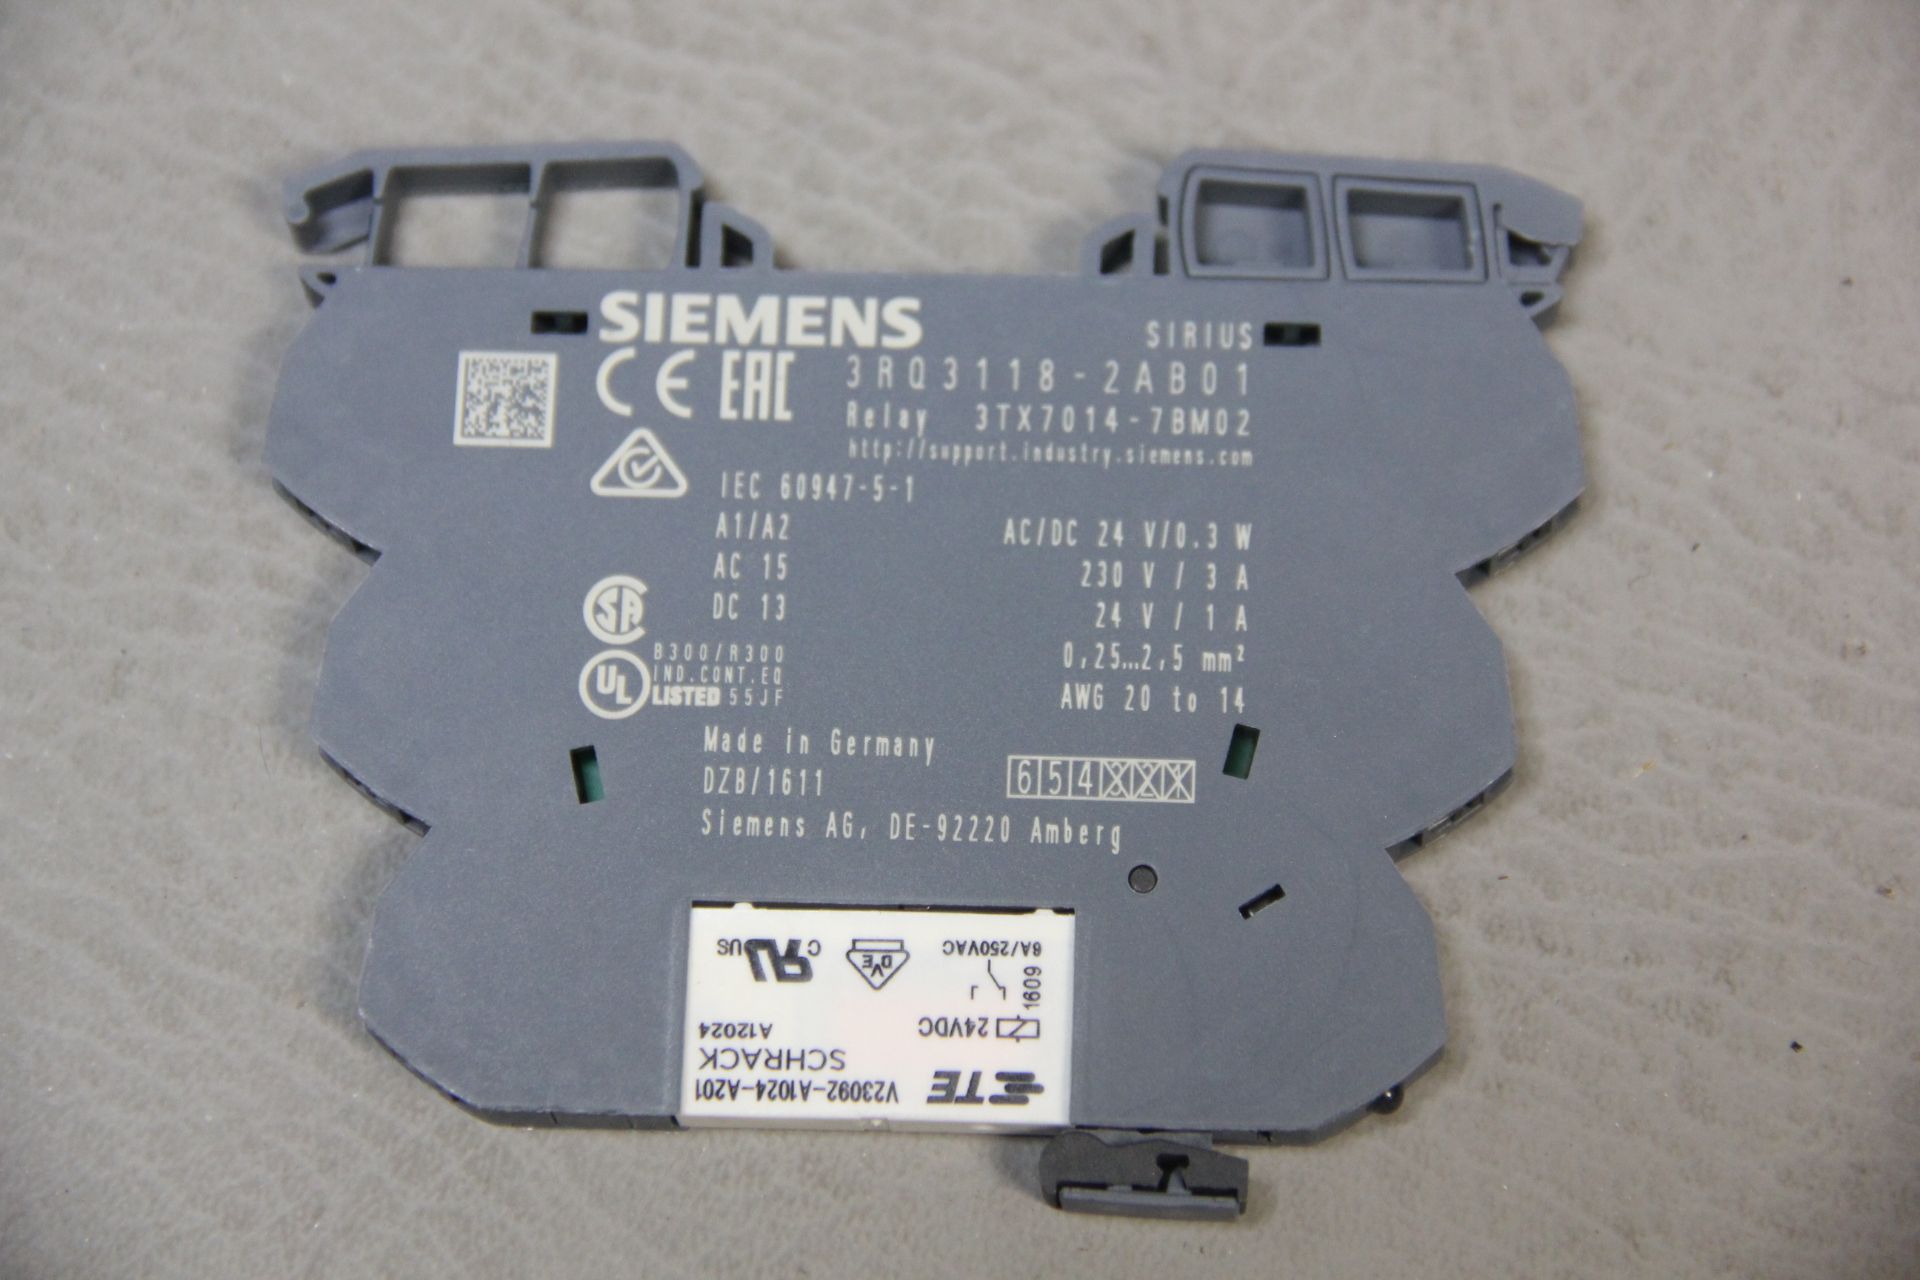 5 UNUSED SIEMENS OUTPUT COUPLER WITH PLUG IN RELAY - Image 3 of 3